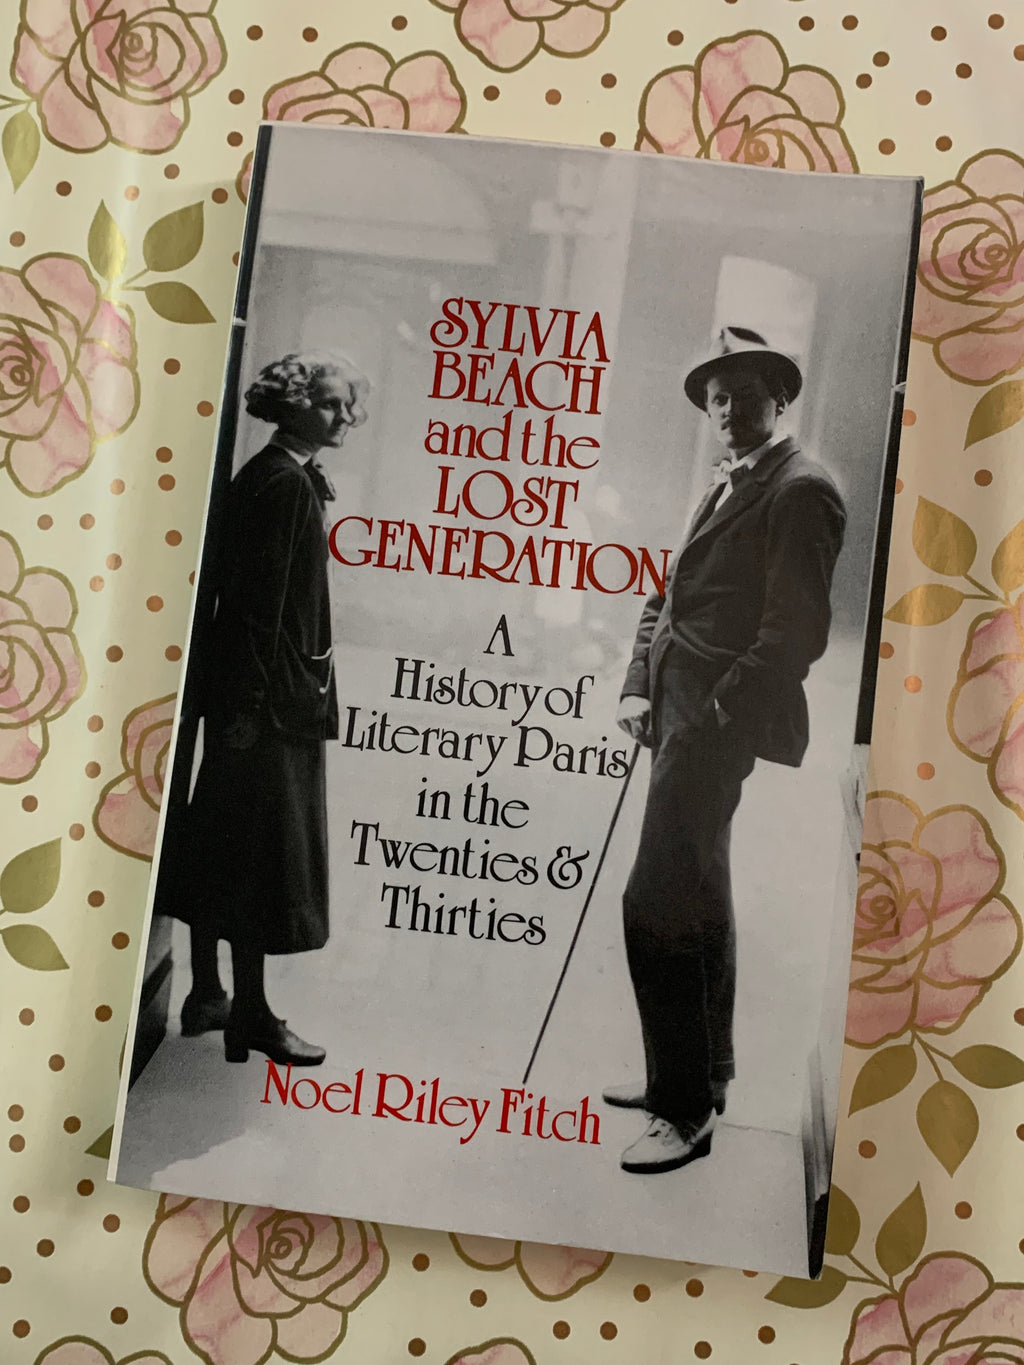 Sylvia Beach and the Lost Generation: A History of Literary Paris in the Twenties & Thirties- By Noel Riley Fitch